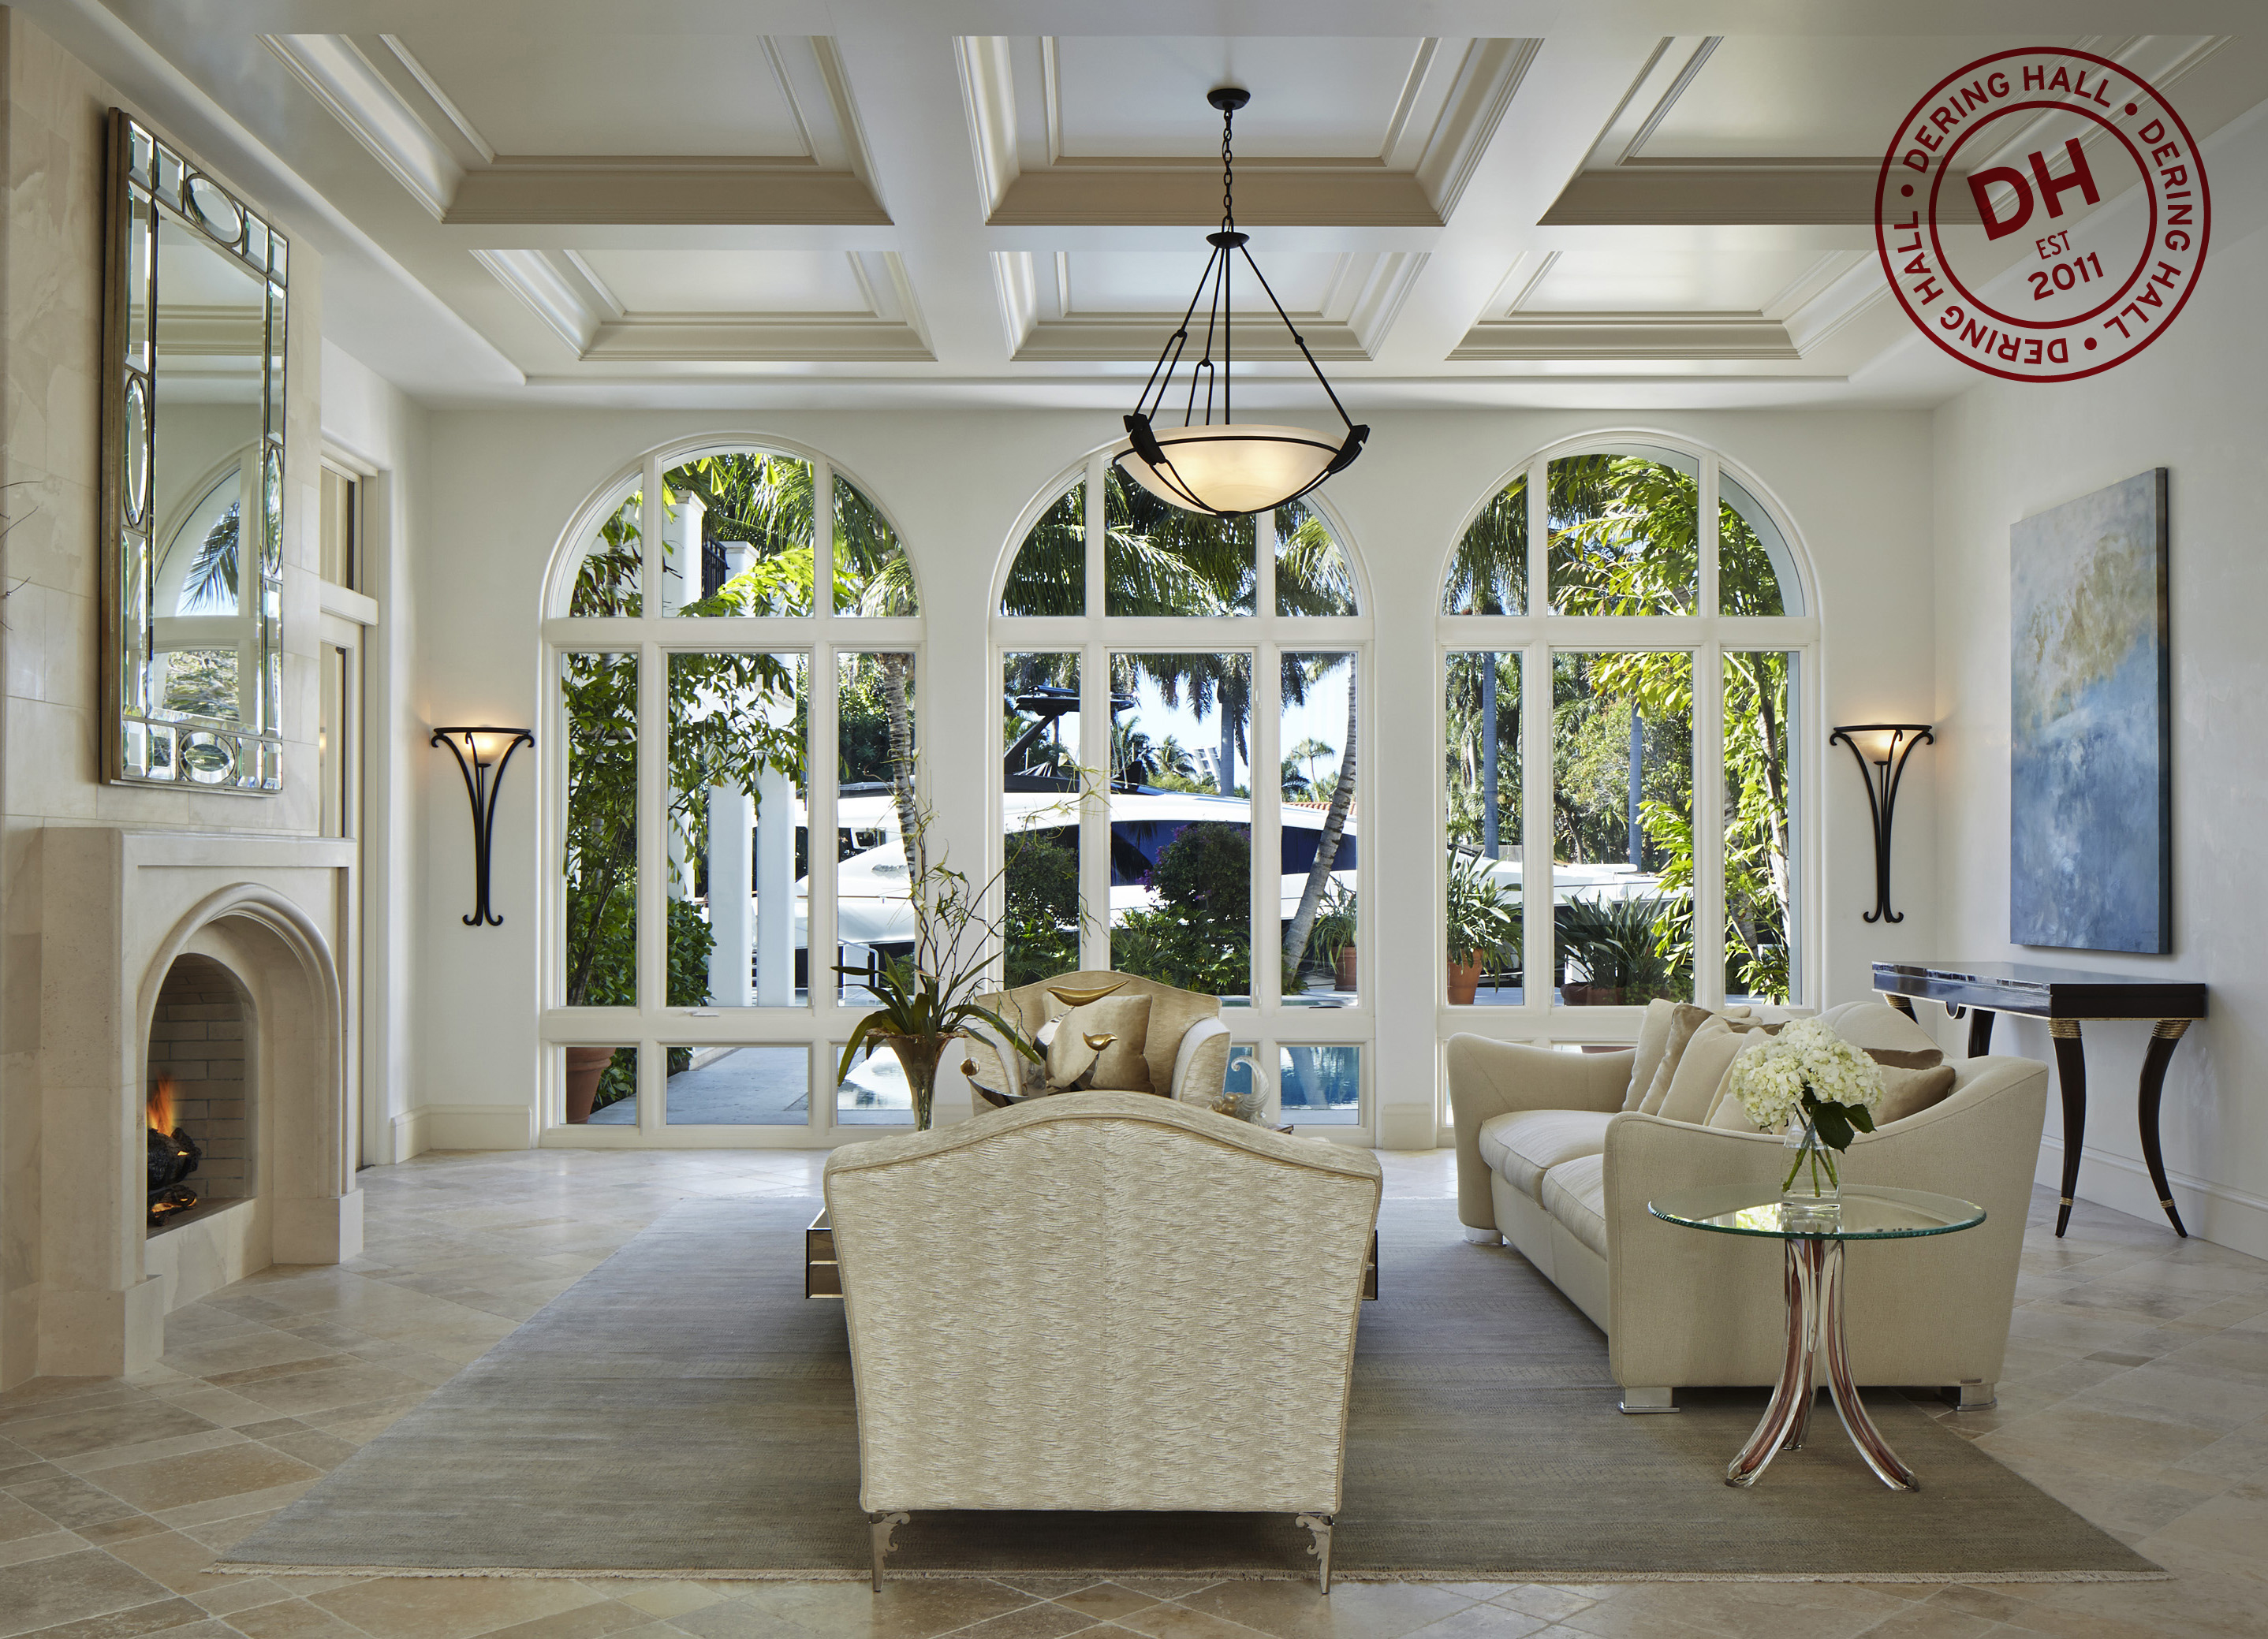 Dering Hall has Featured Our Fort Lauderdale Estate ...